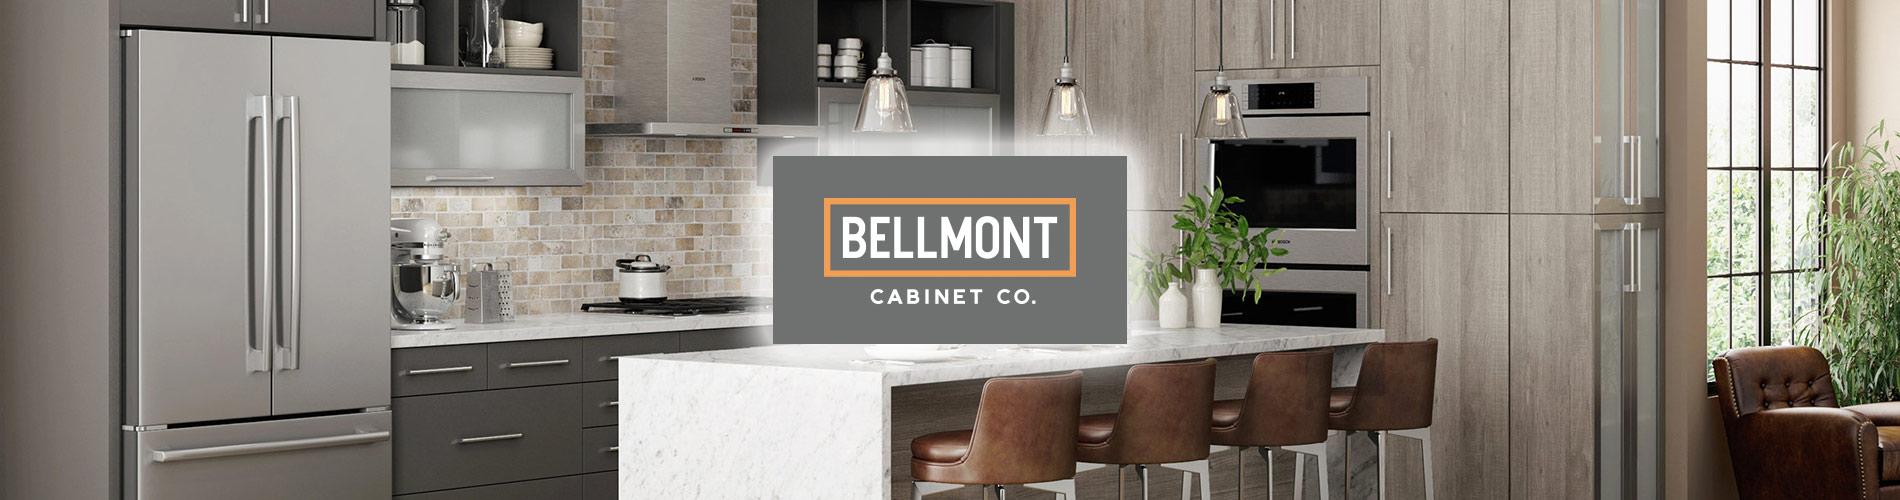 Bellmont cabinetry